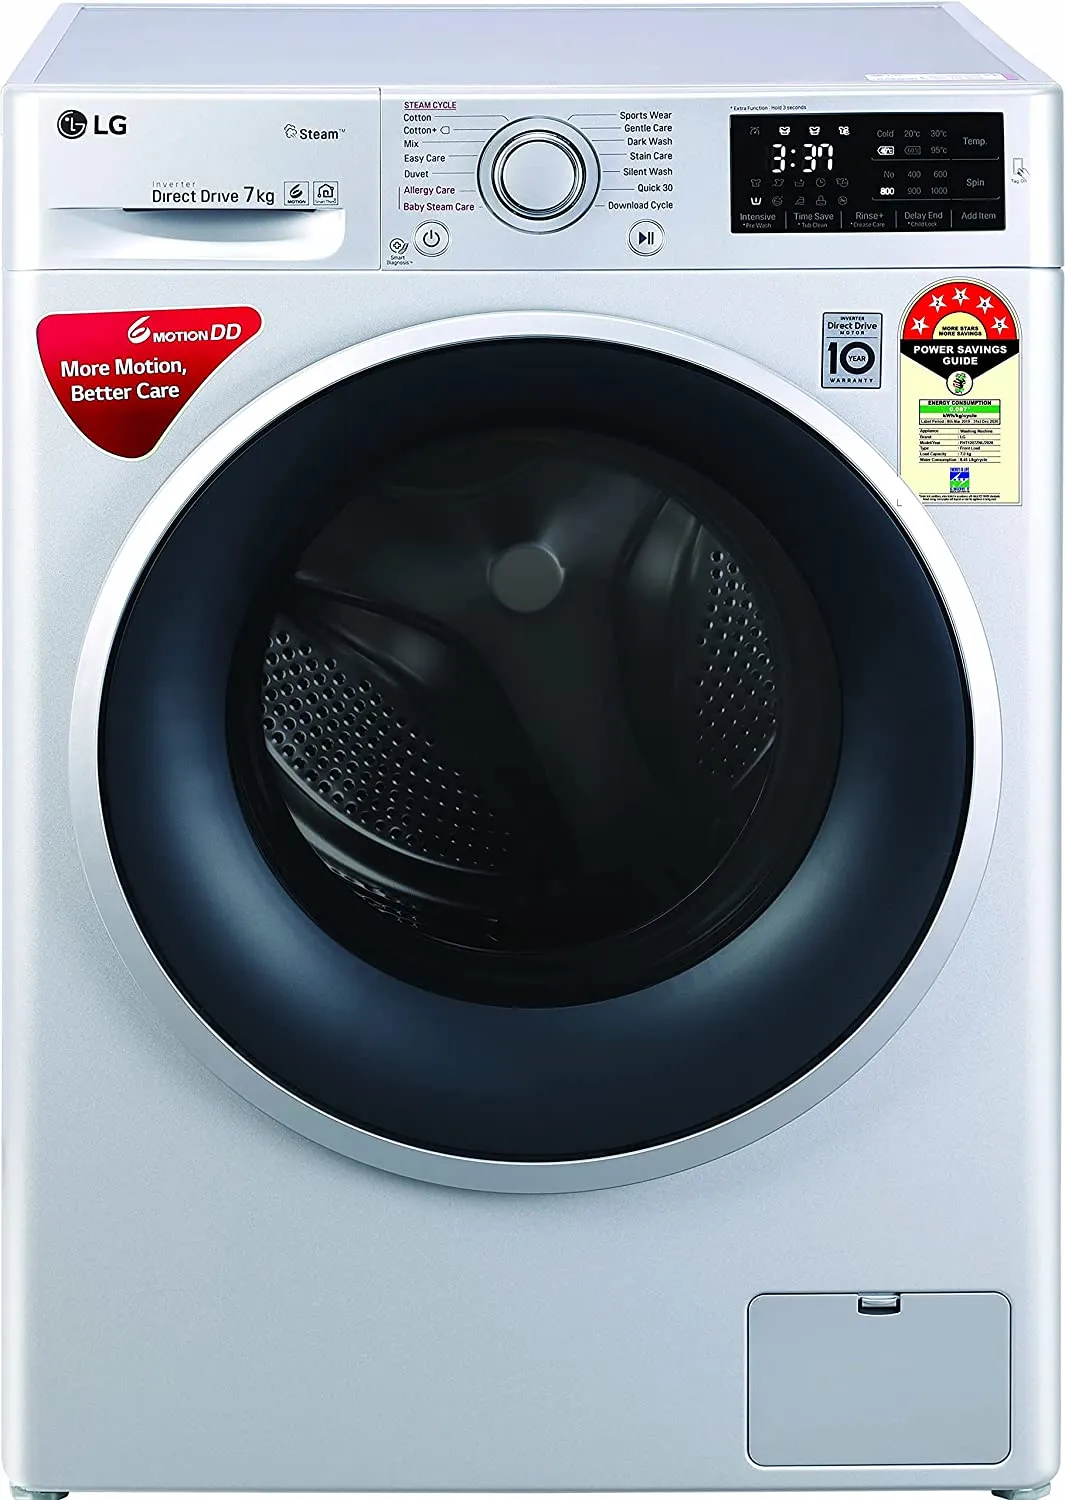 LG 7 Kg 5 Star Inverter Fully-Automatic Front Loading Washing Machine (FHT1207ZNL, 6 Motion Direct Drive Washer with